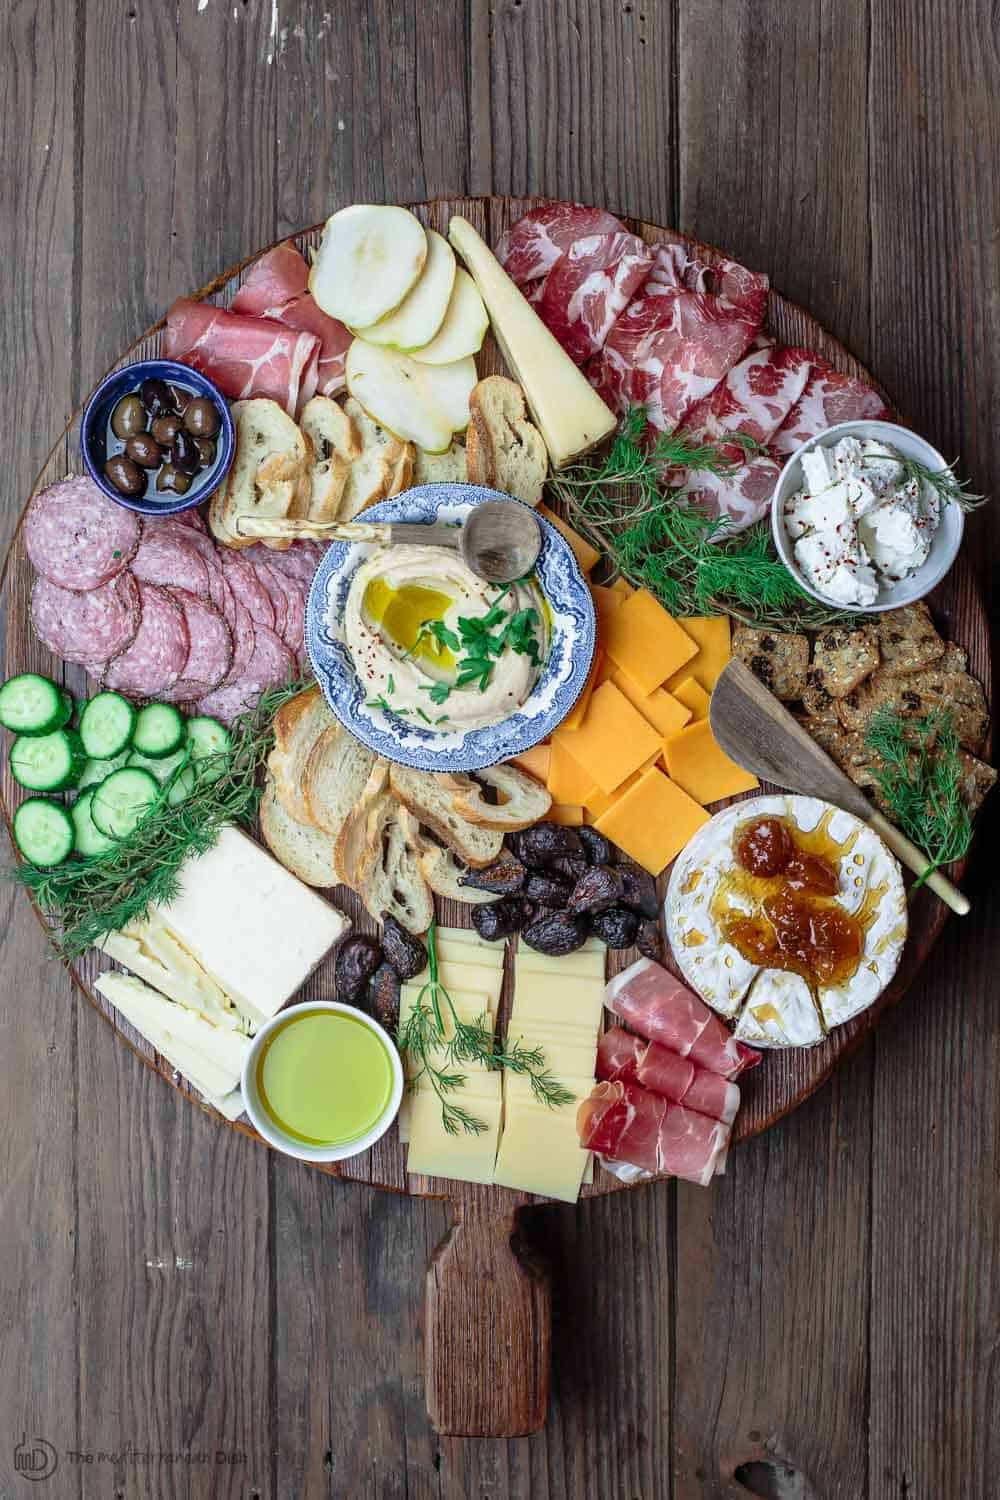 Make a Cheese Board in 5 simple steps